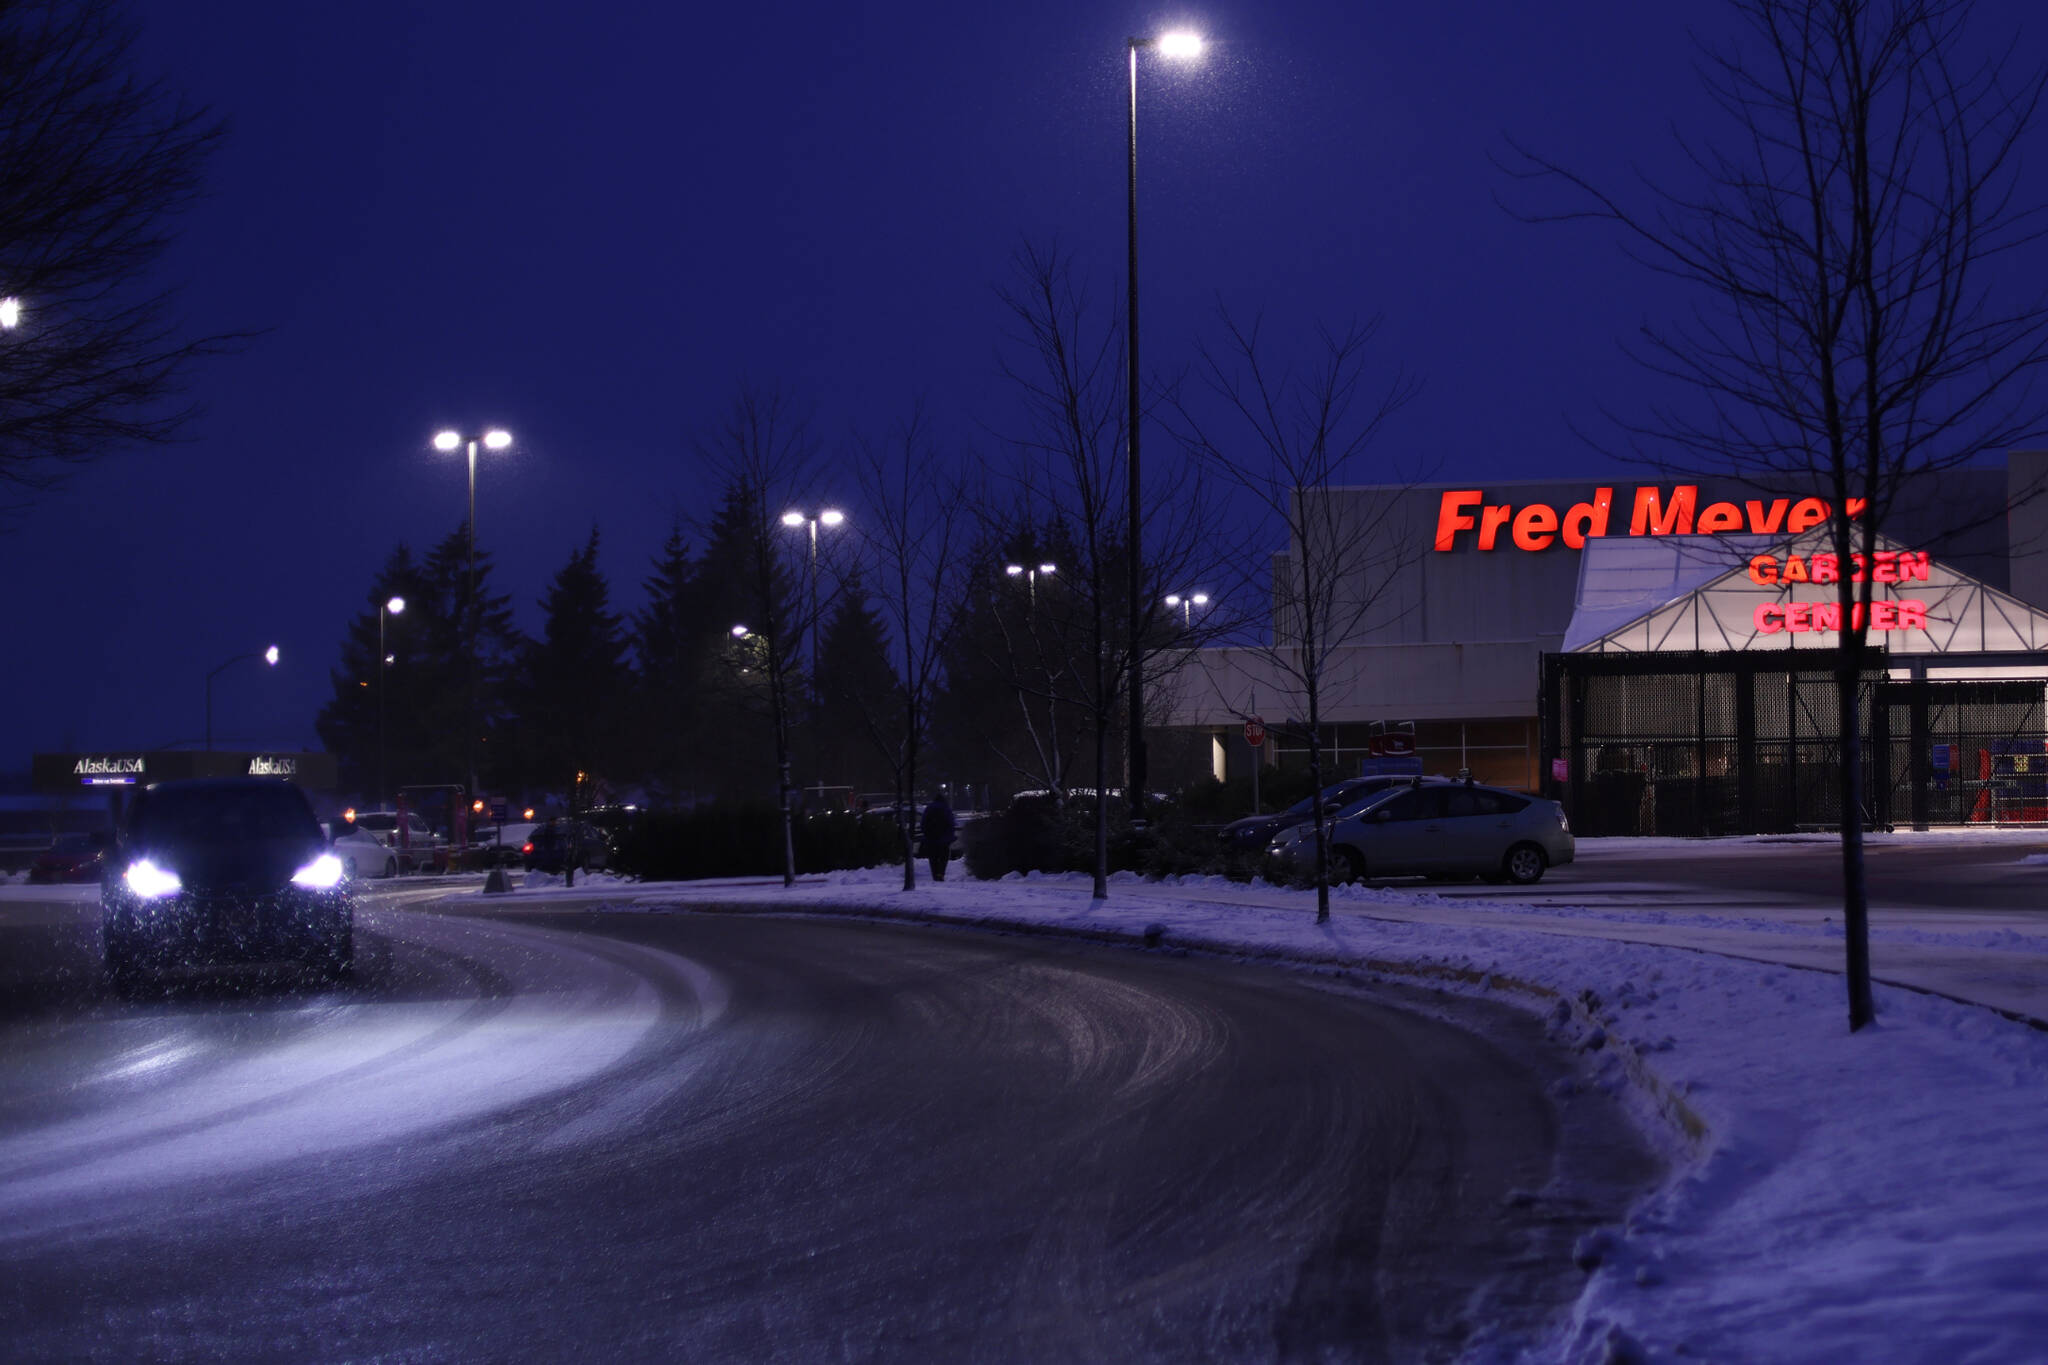 A vehicle exits the Juneau Fred Meyer parking lot on Wednesday. Juneau Police Department is investigating a report of a threat made against the store. (Ben Hohenstatt / Juneau Empire)